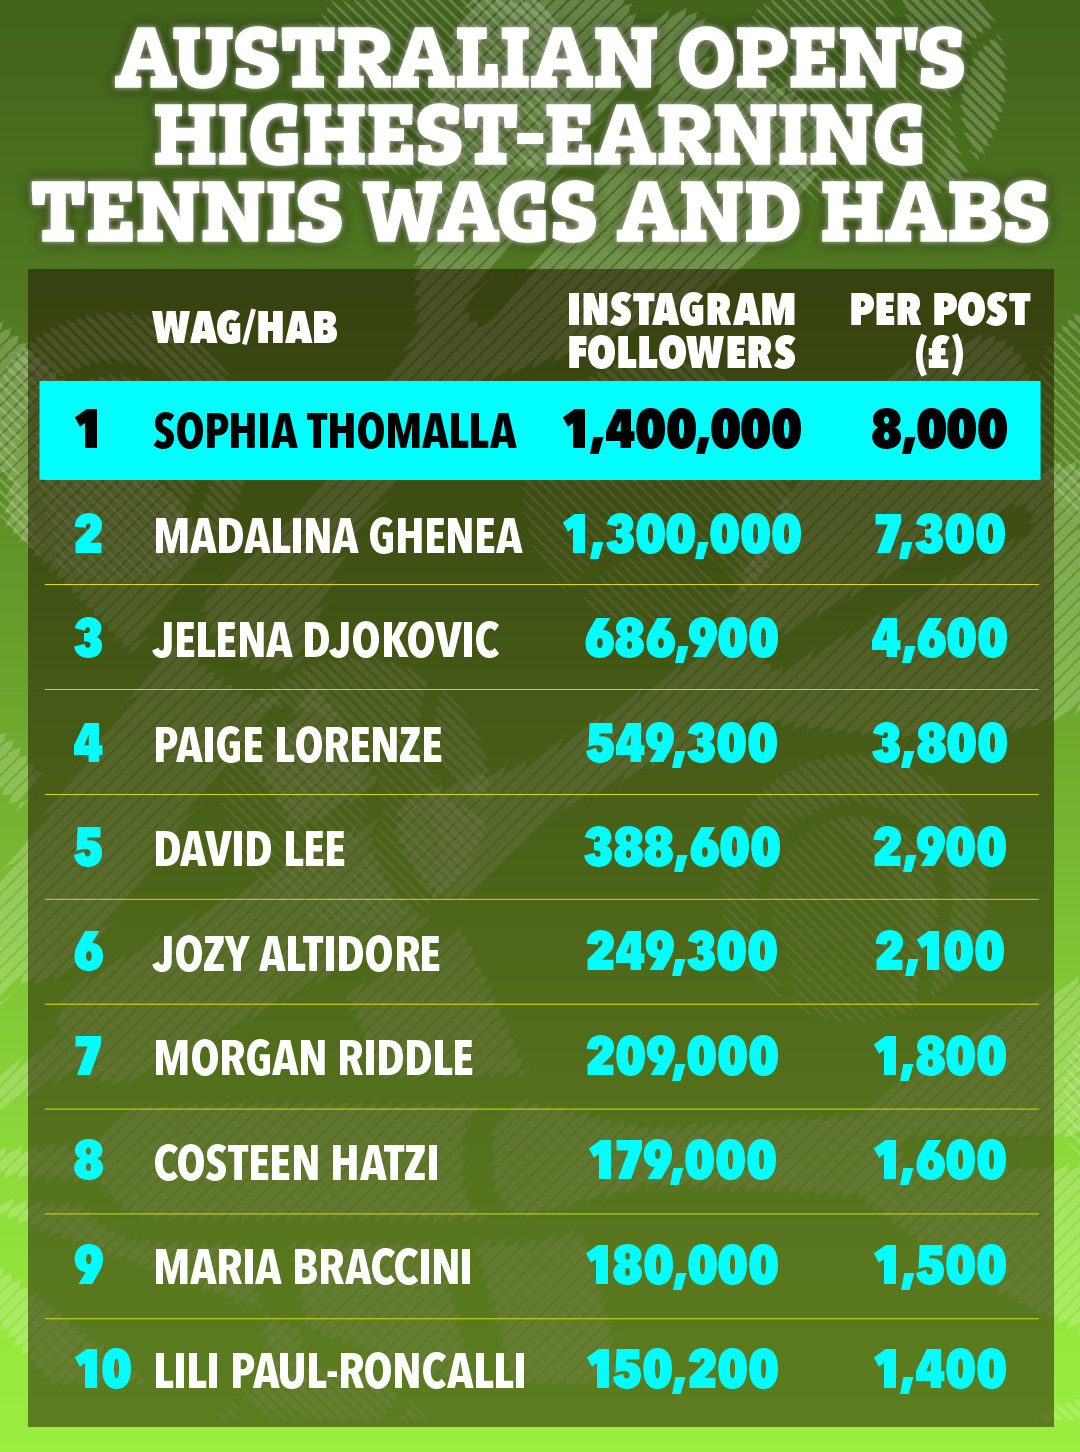 The highest earning partners at the Australian Open